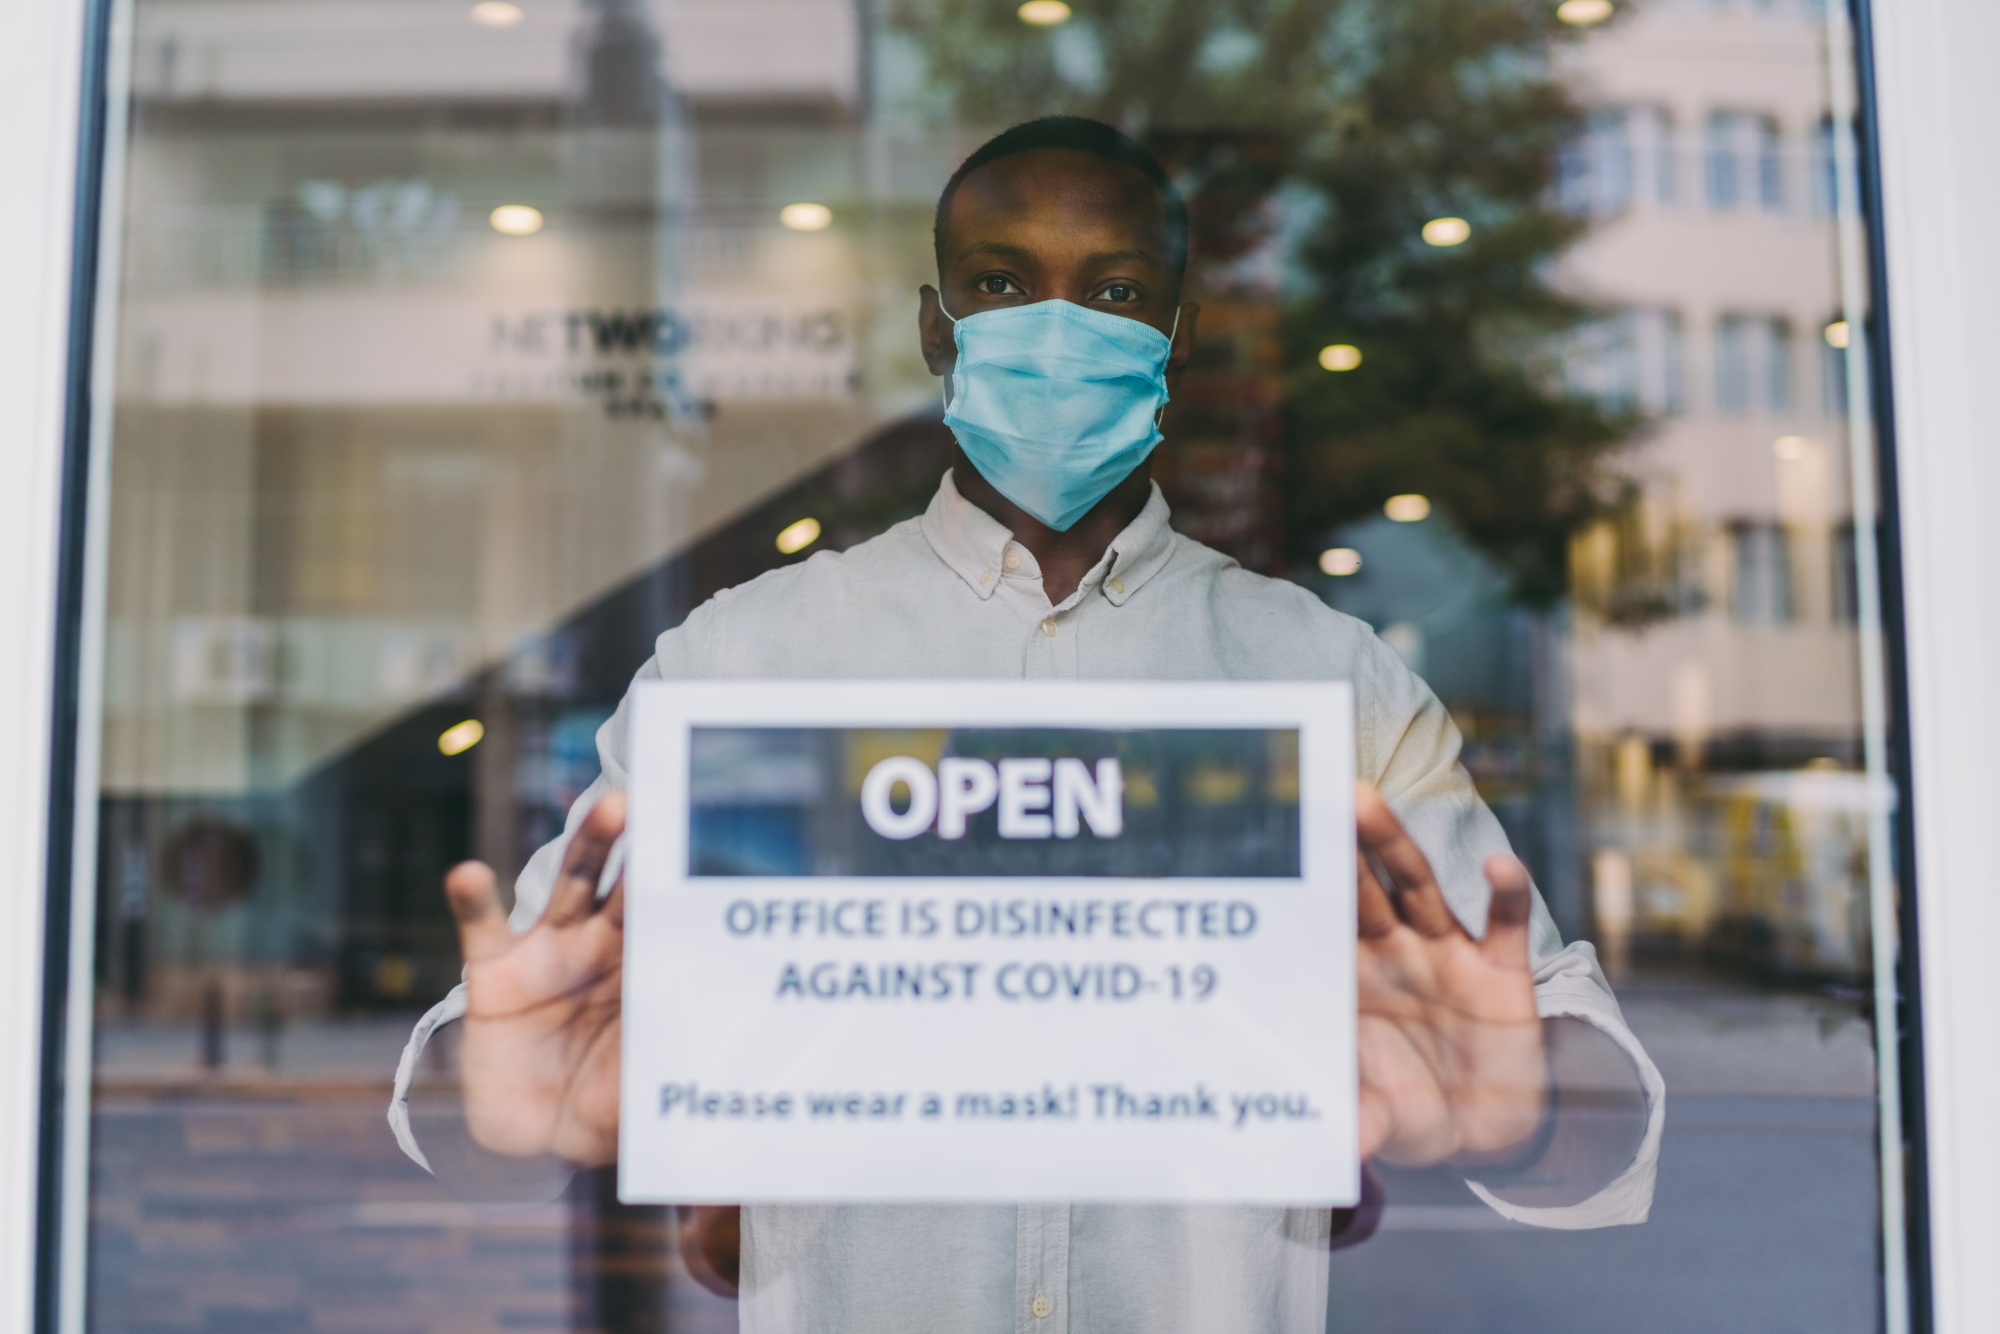 research title about small business during pandemic